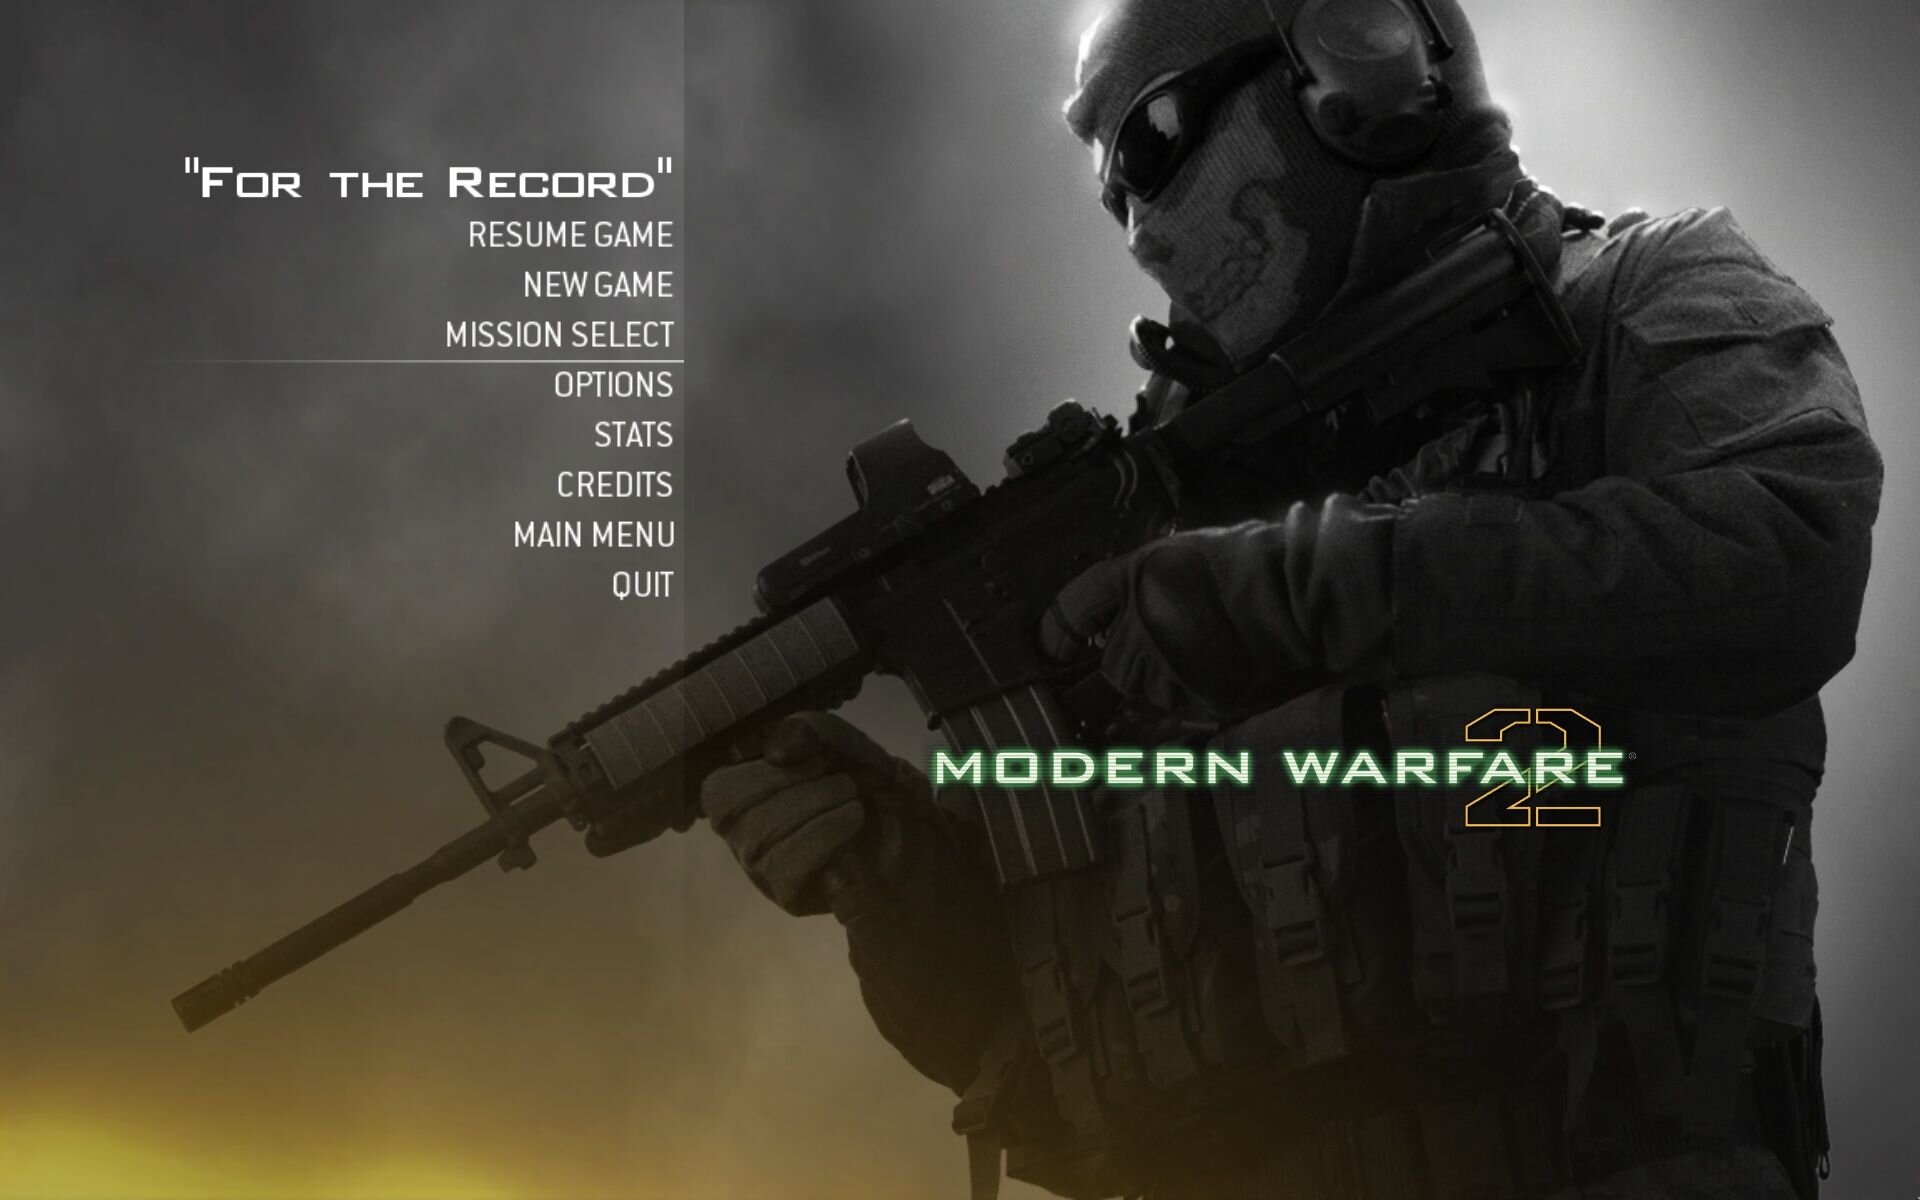 Is Modern Warfare 2 the Best Call of Duty Game Ever?